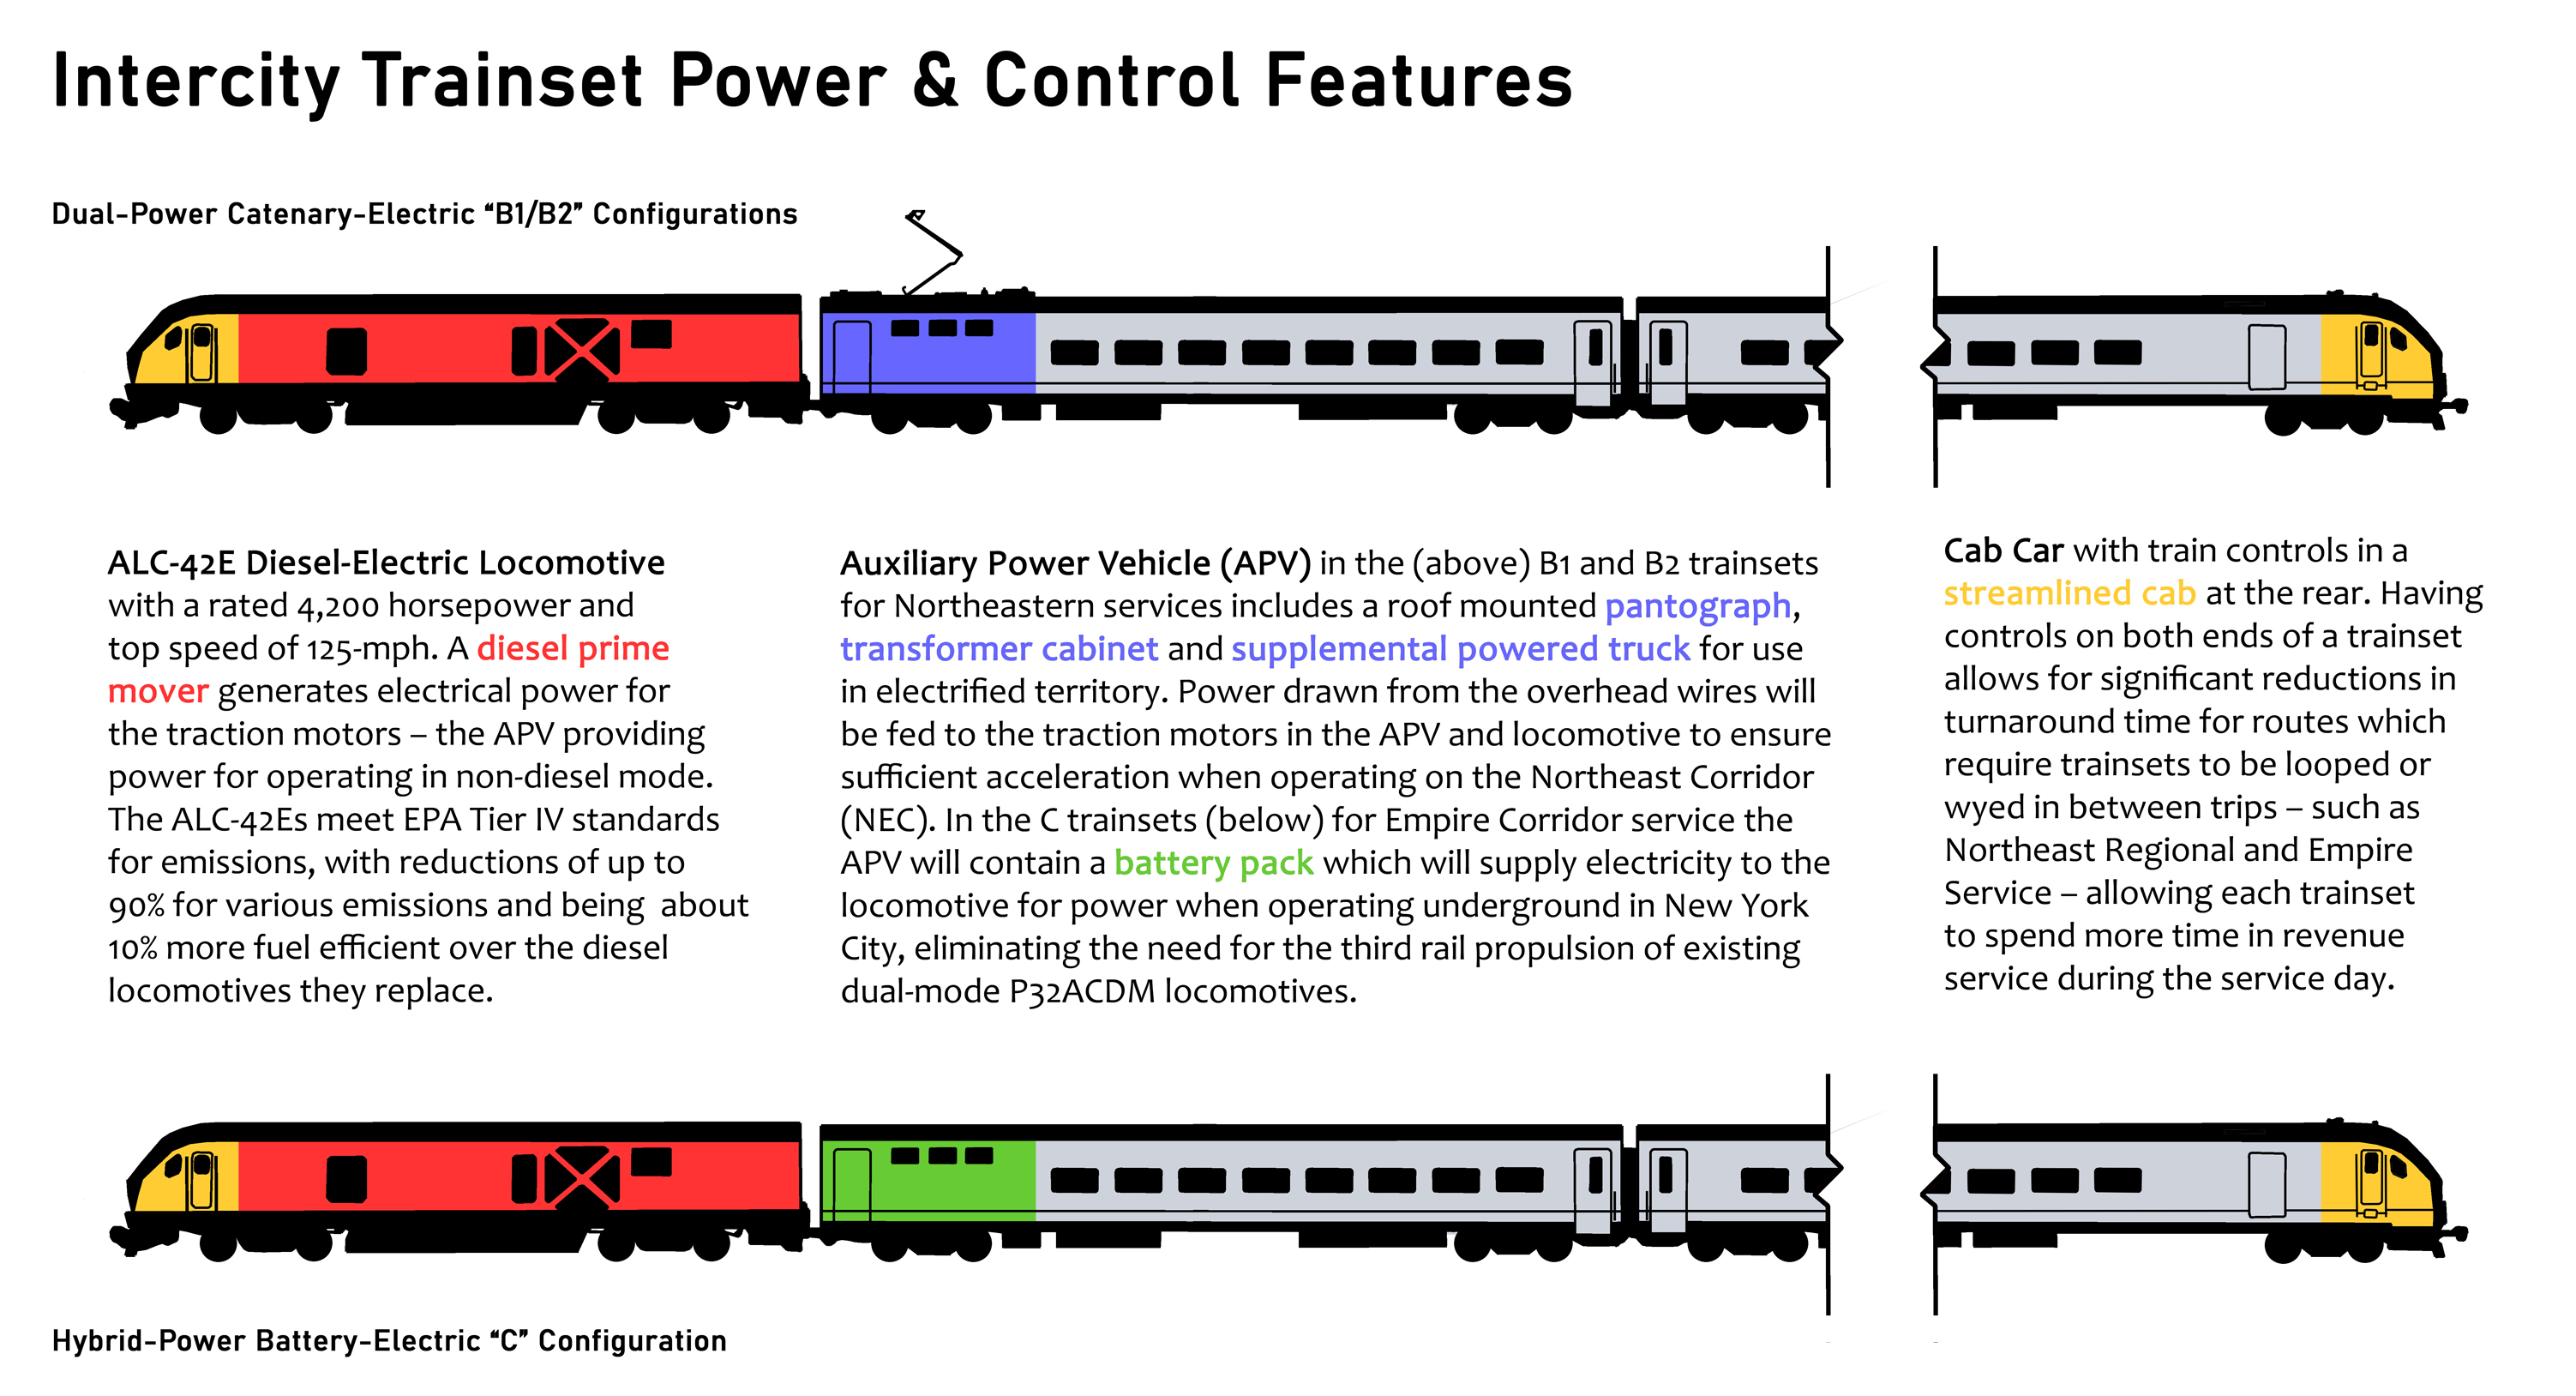 intercity_trainset_power_control_features_02.jpg